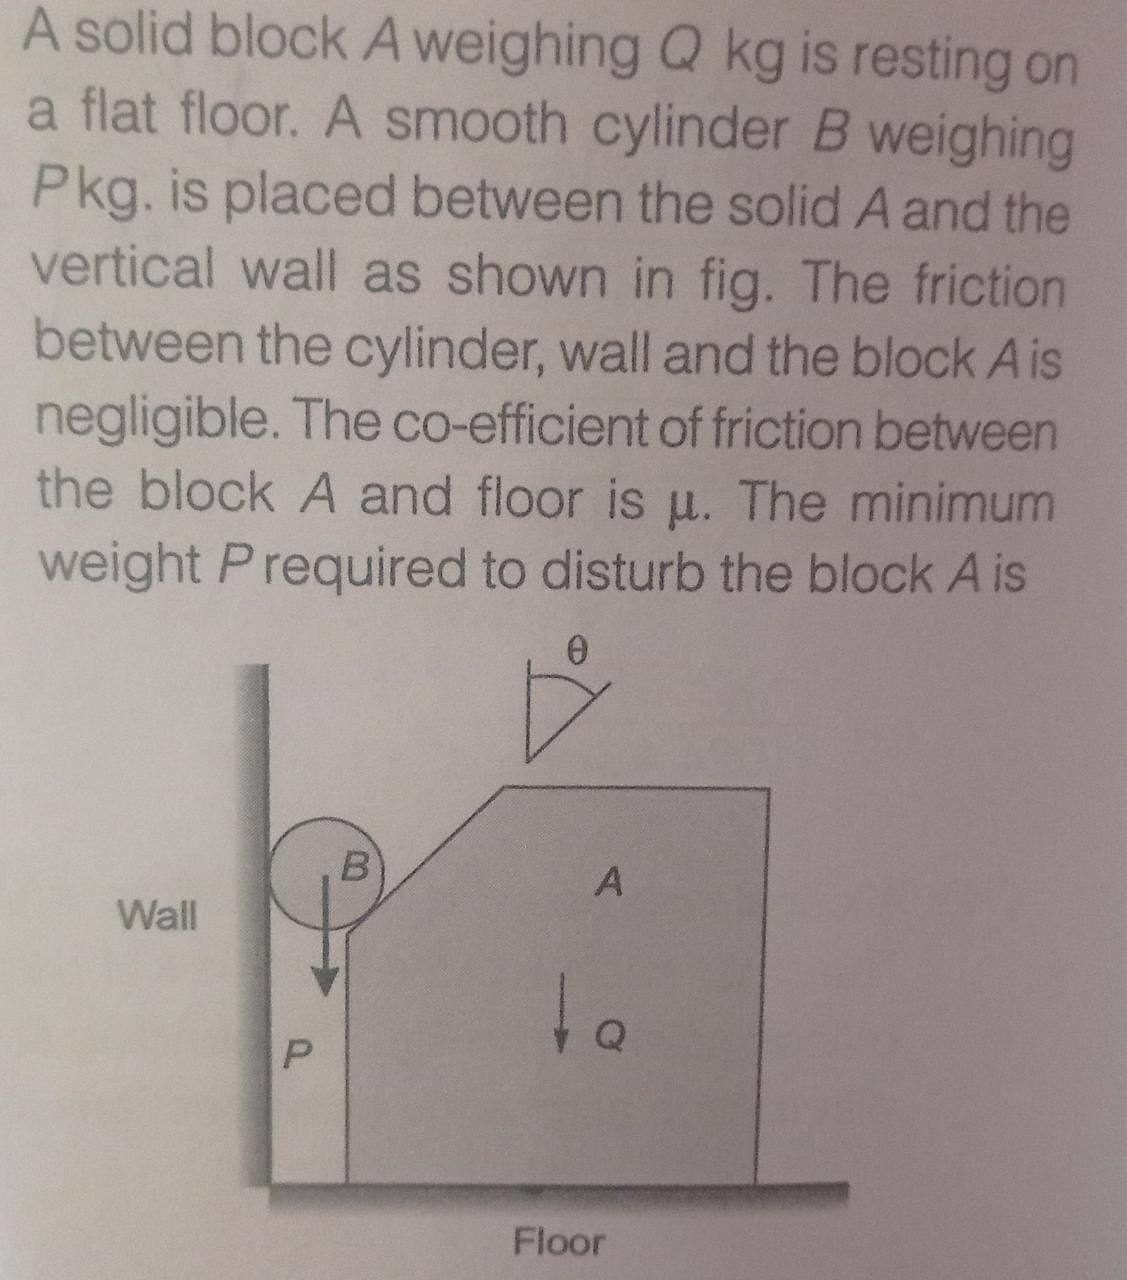 A solid block A weighing Q kg is resting on
a flat floor. A smooth cylinder B weighing
Pkg. is placed between the solid A and the
vertical wall as shown in fig. The friction
between the cylinder, wall and the block A is
negligible. The co-efficient of friction between
the block A and floor is u. The minimum
weight Prequired to disturb the block A is
Wall
to
Floor
